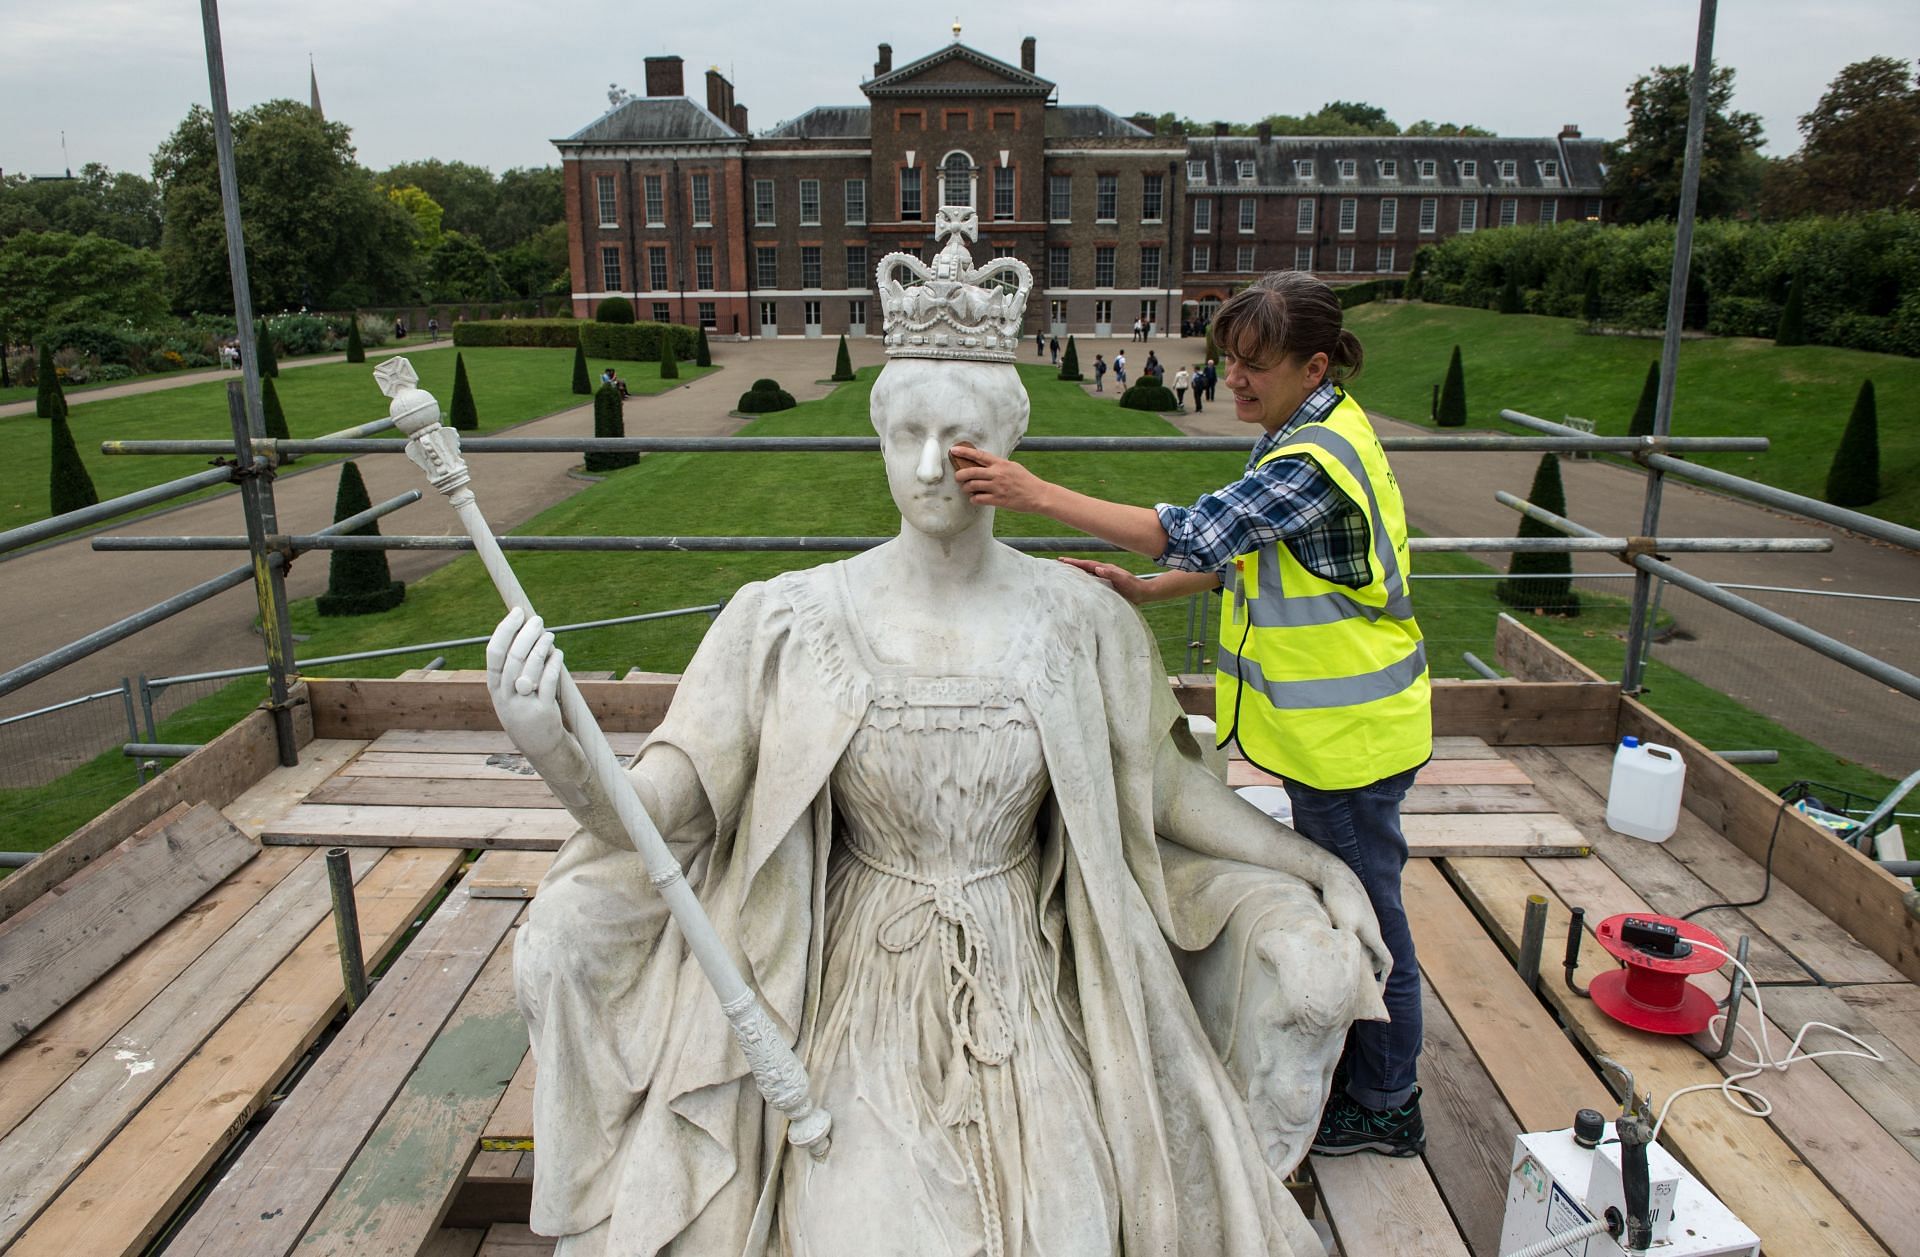 Queen Victoria Statue At Kensington Palace Is Re-touched